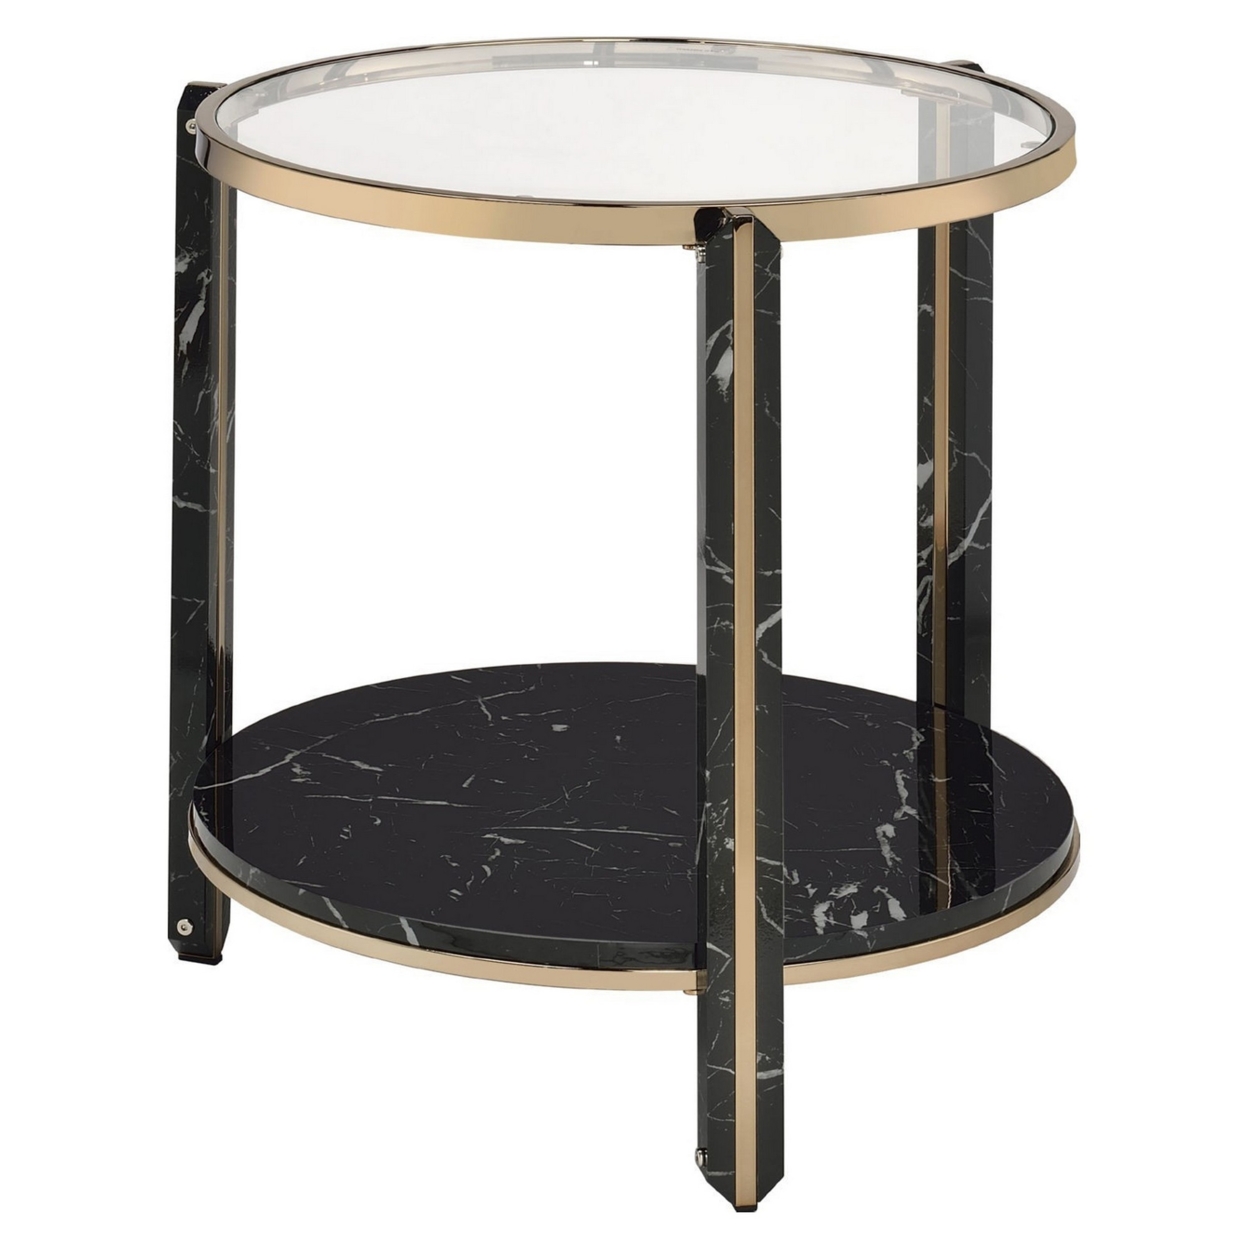 End Table With Glass Top And Faux Marble Shelf, Black And Gold- Saltoro Sherpi